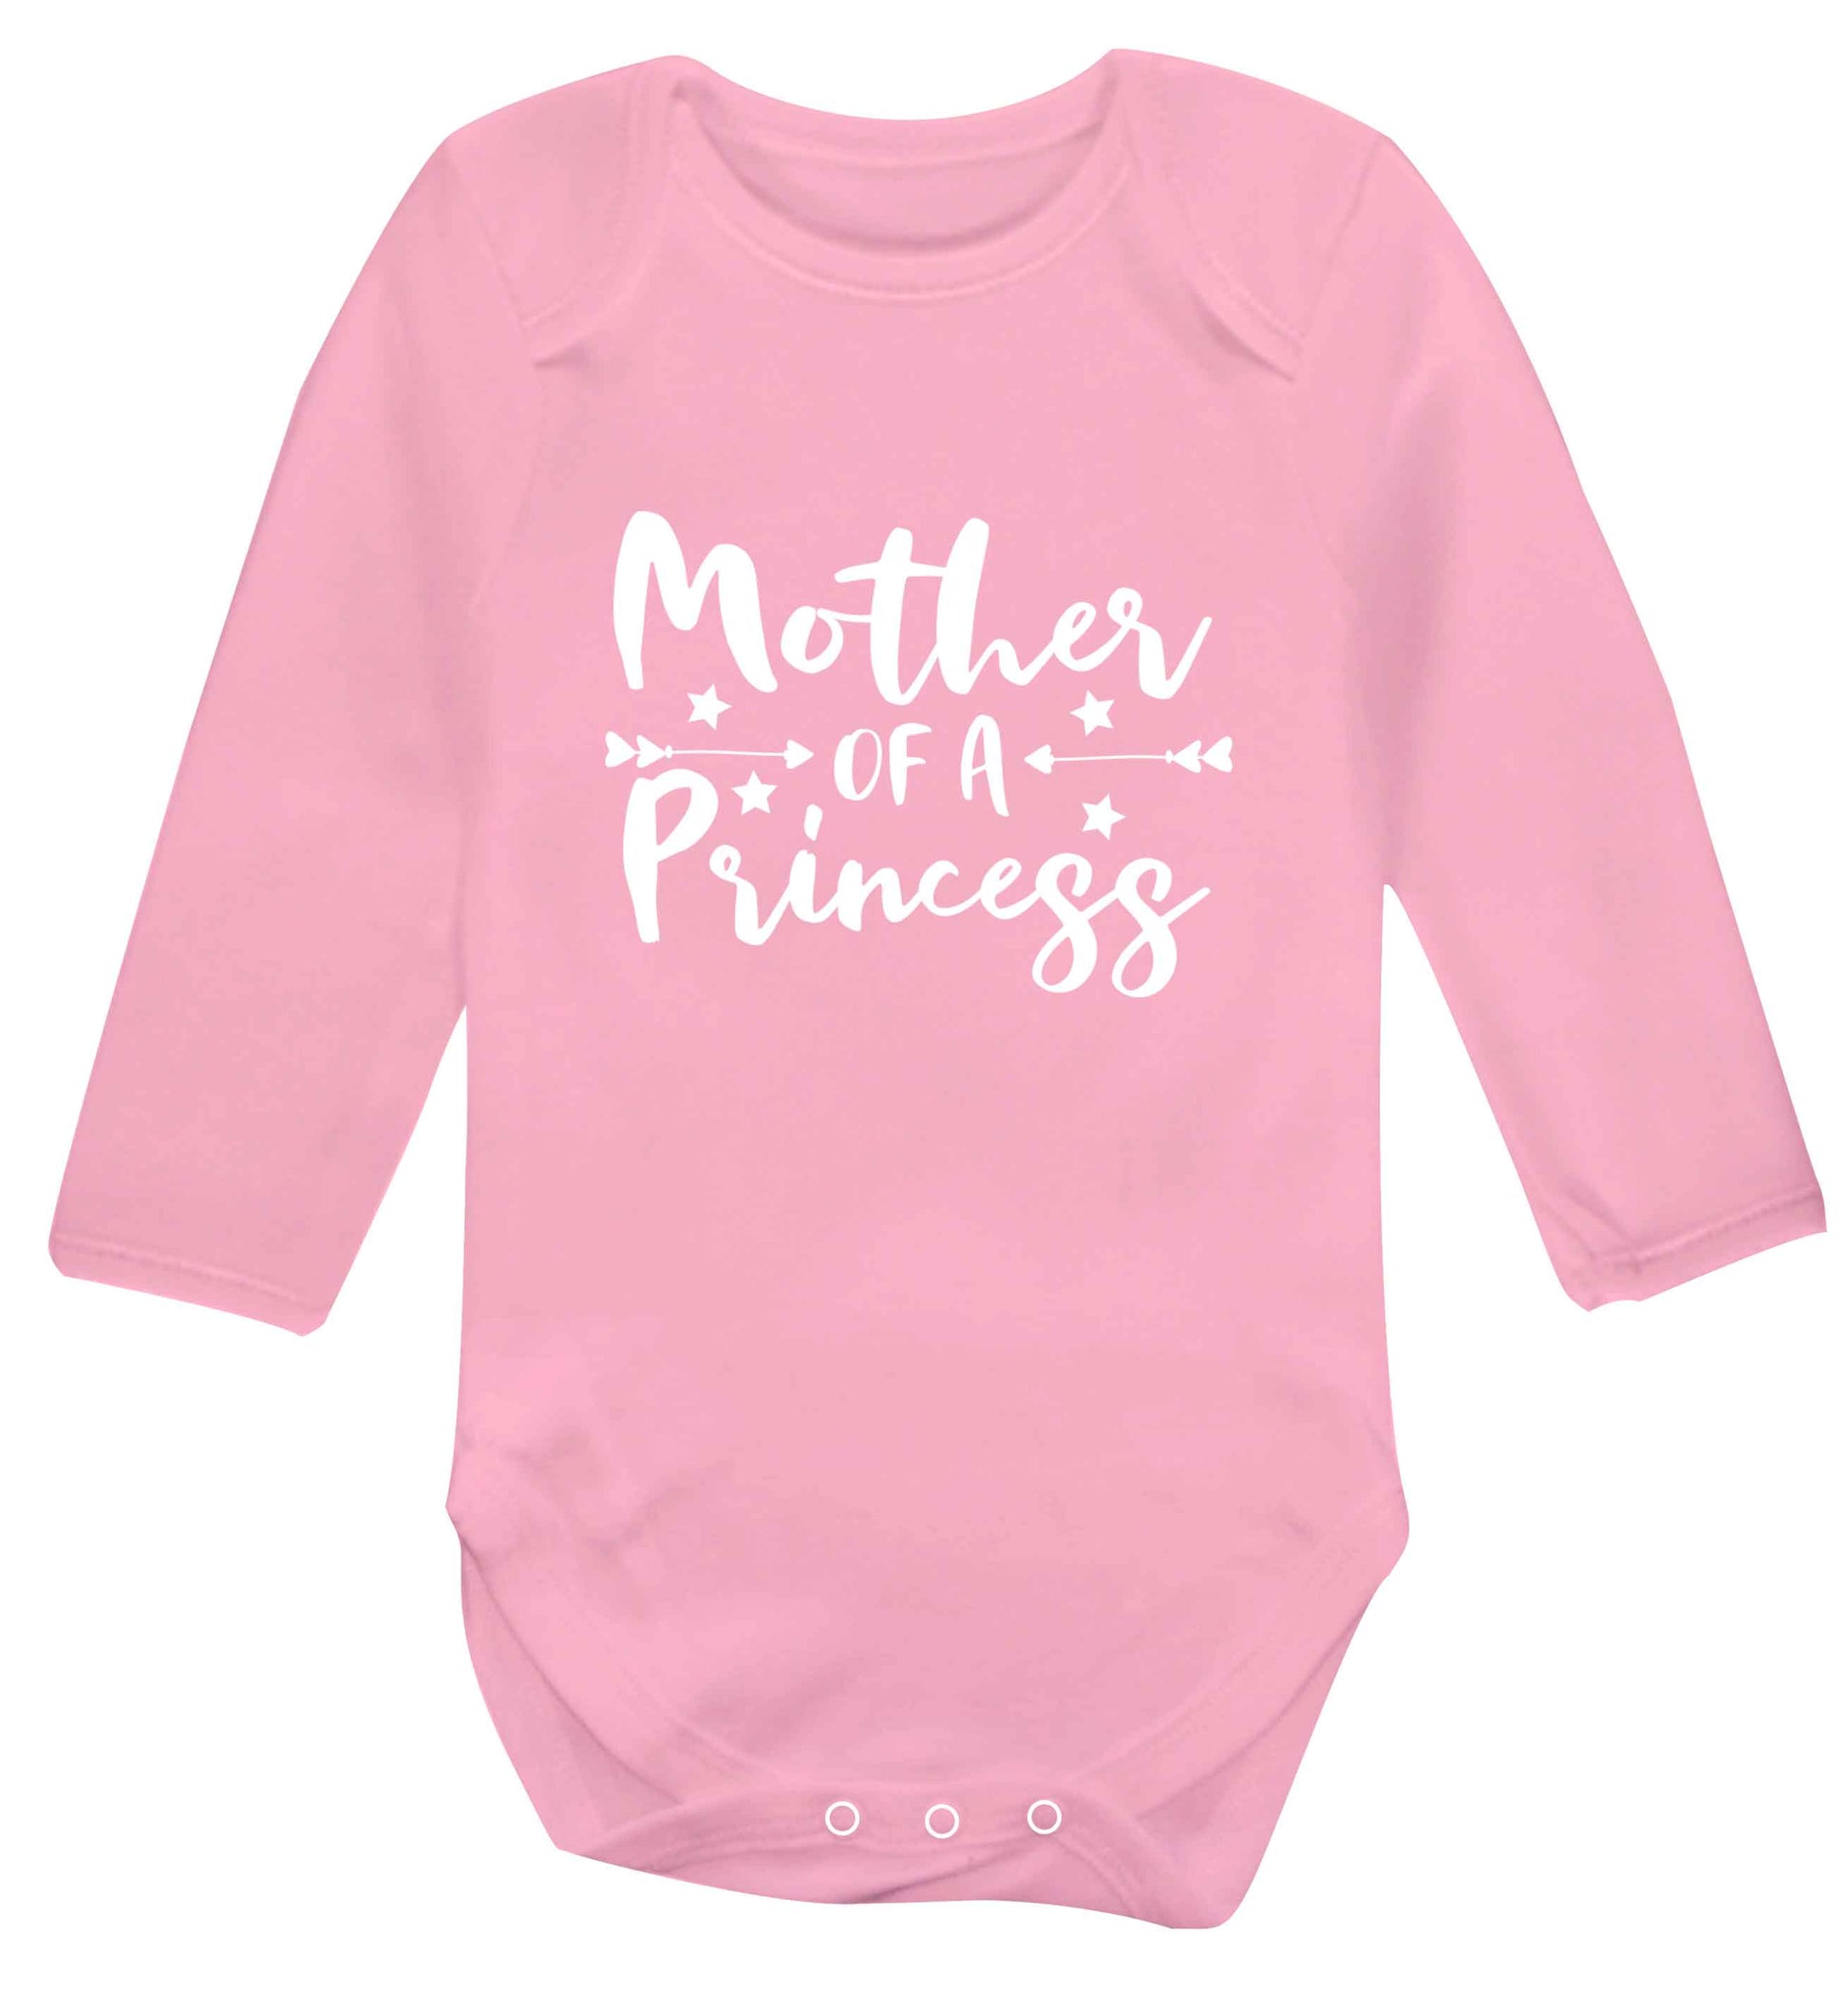 Mother of a princess baby vest long sleeved pale pink 6-12 months